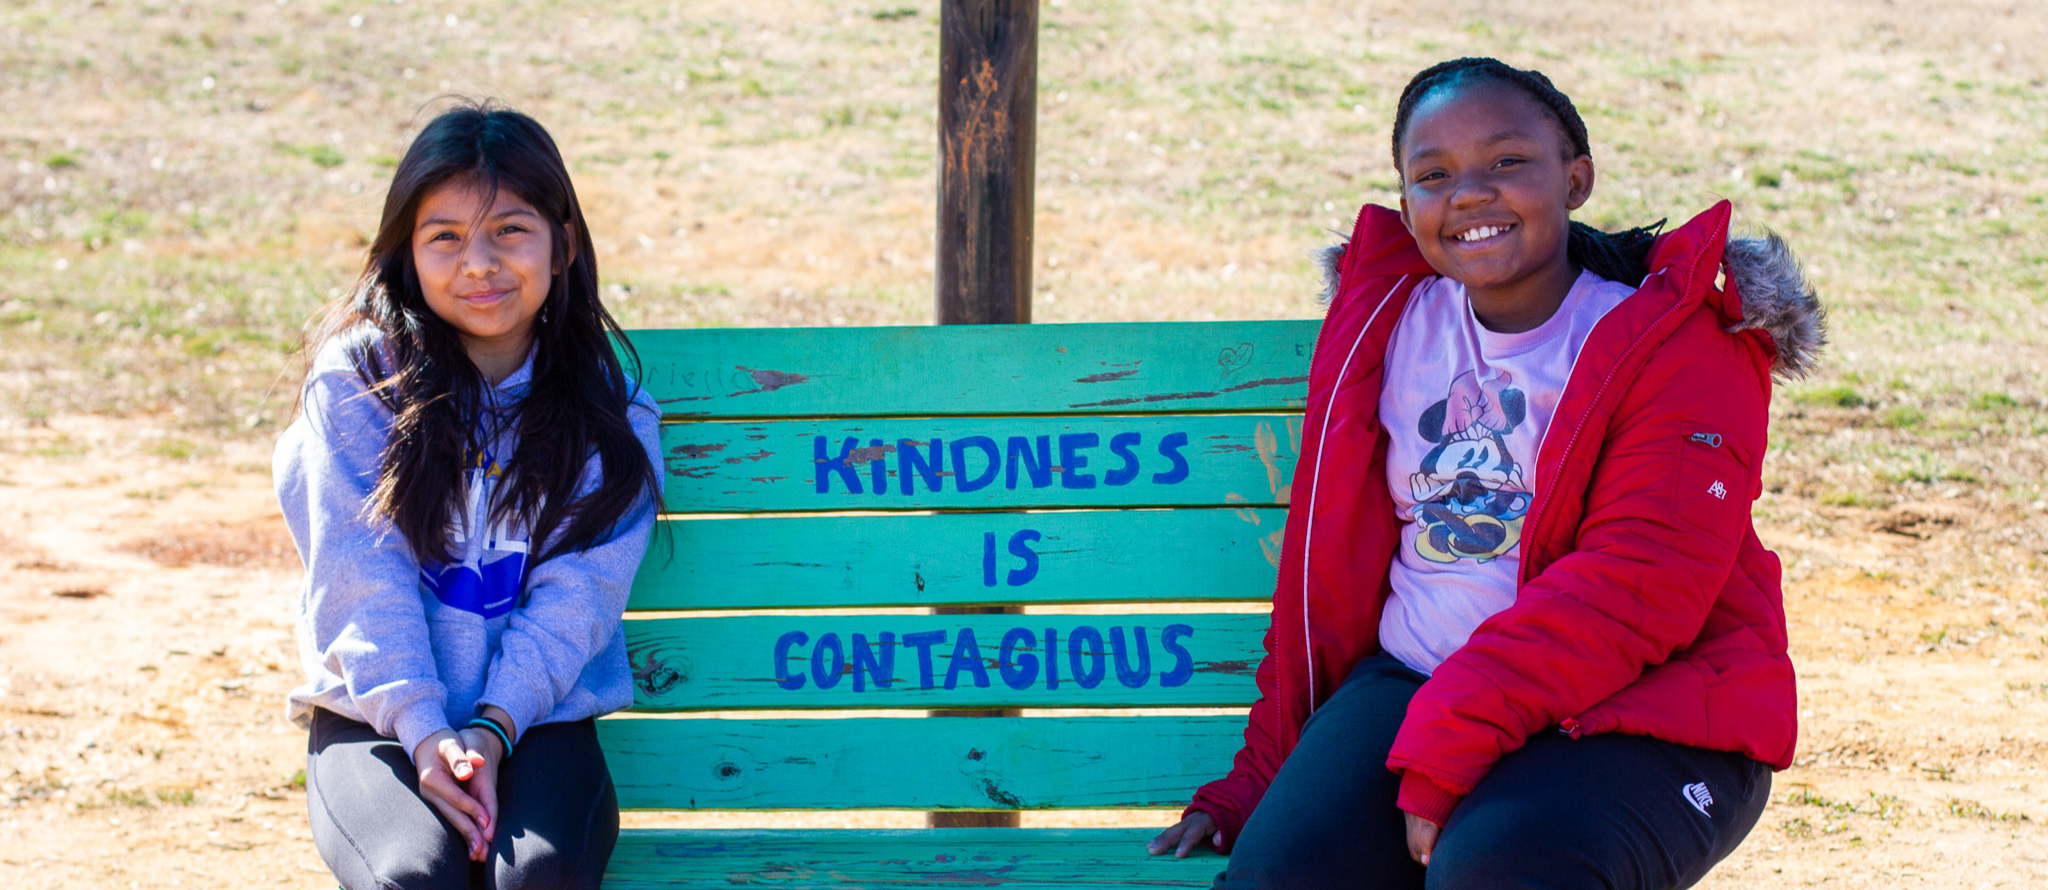 Photograph of two fifth grade girls at Highland Elementary sitting on a bench on the playground with the words "Kindness is Contagious" painted on the bench showing